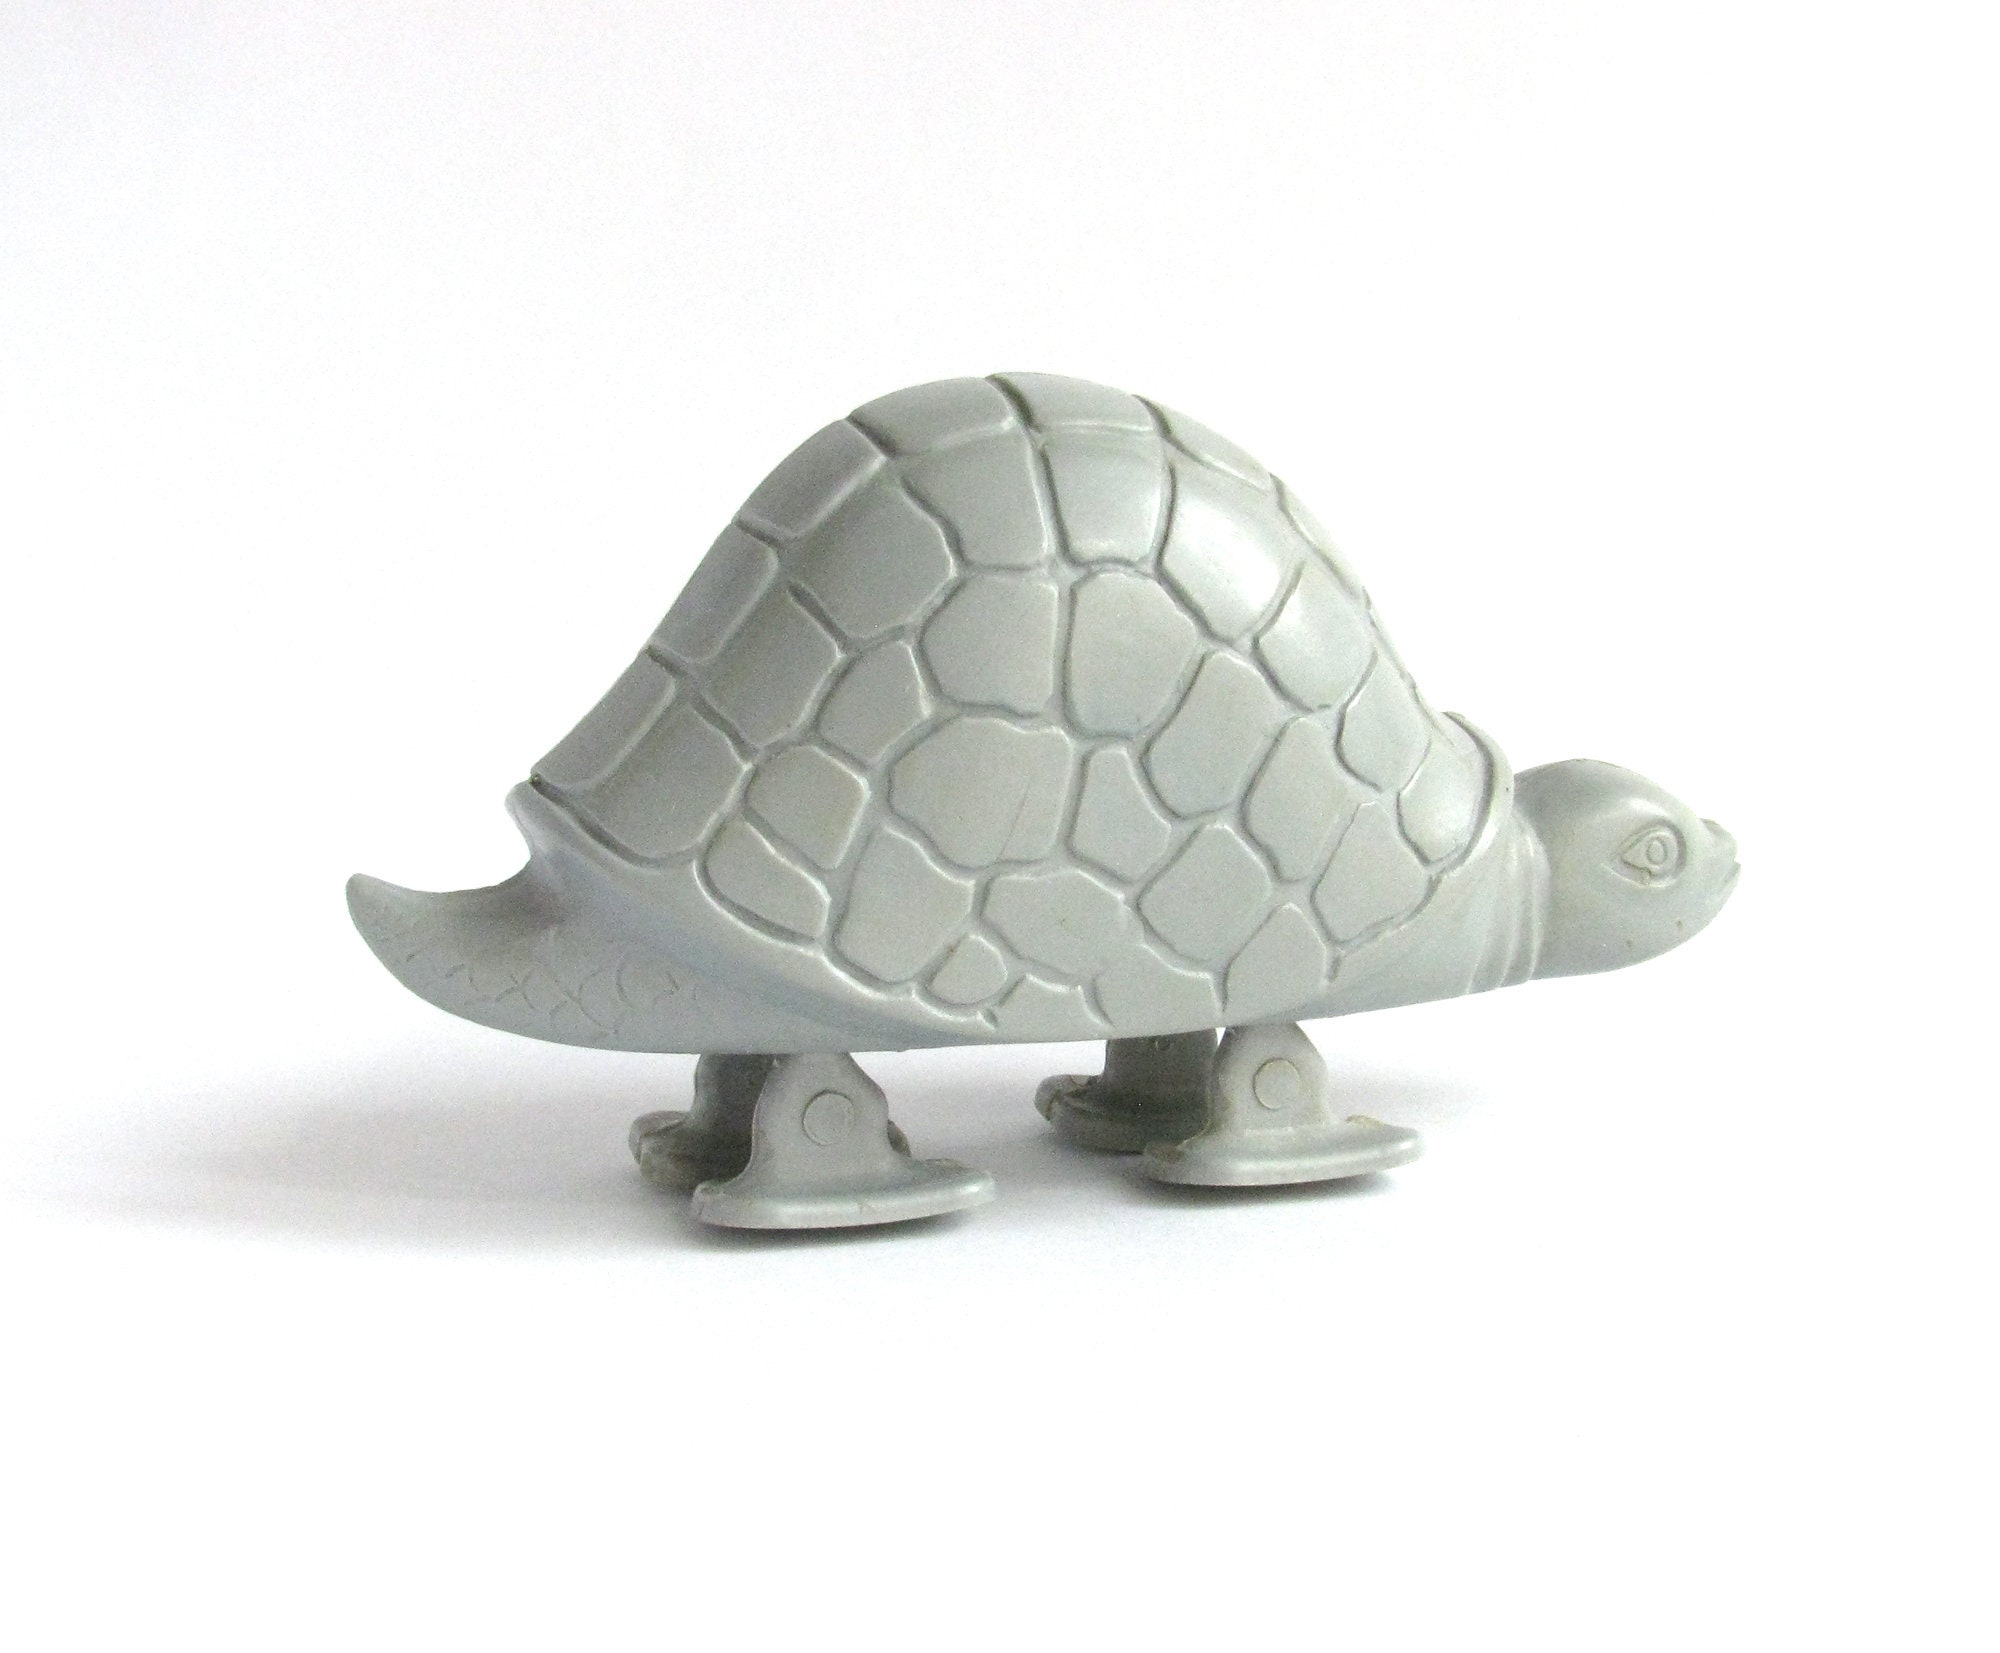 Ramp Walker, Turtle, Vintage Plastic Animal Toy, Funny, Moveable, Cute, Old Russian Toy, Made in Ussr, Soviet Union, 1980S